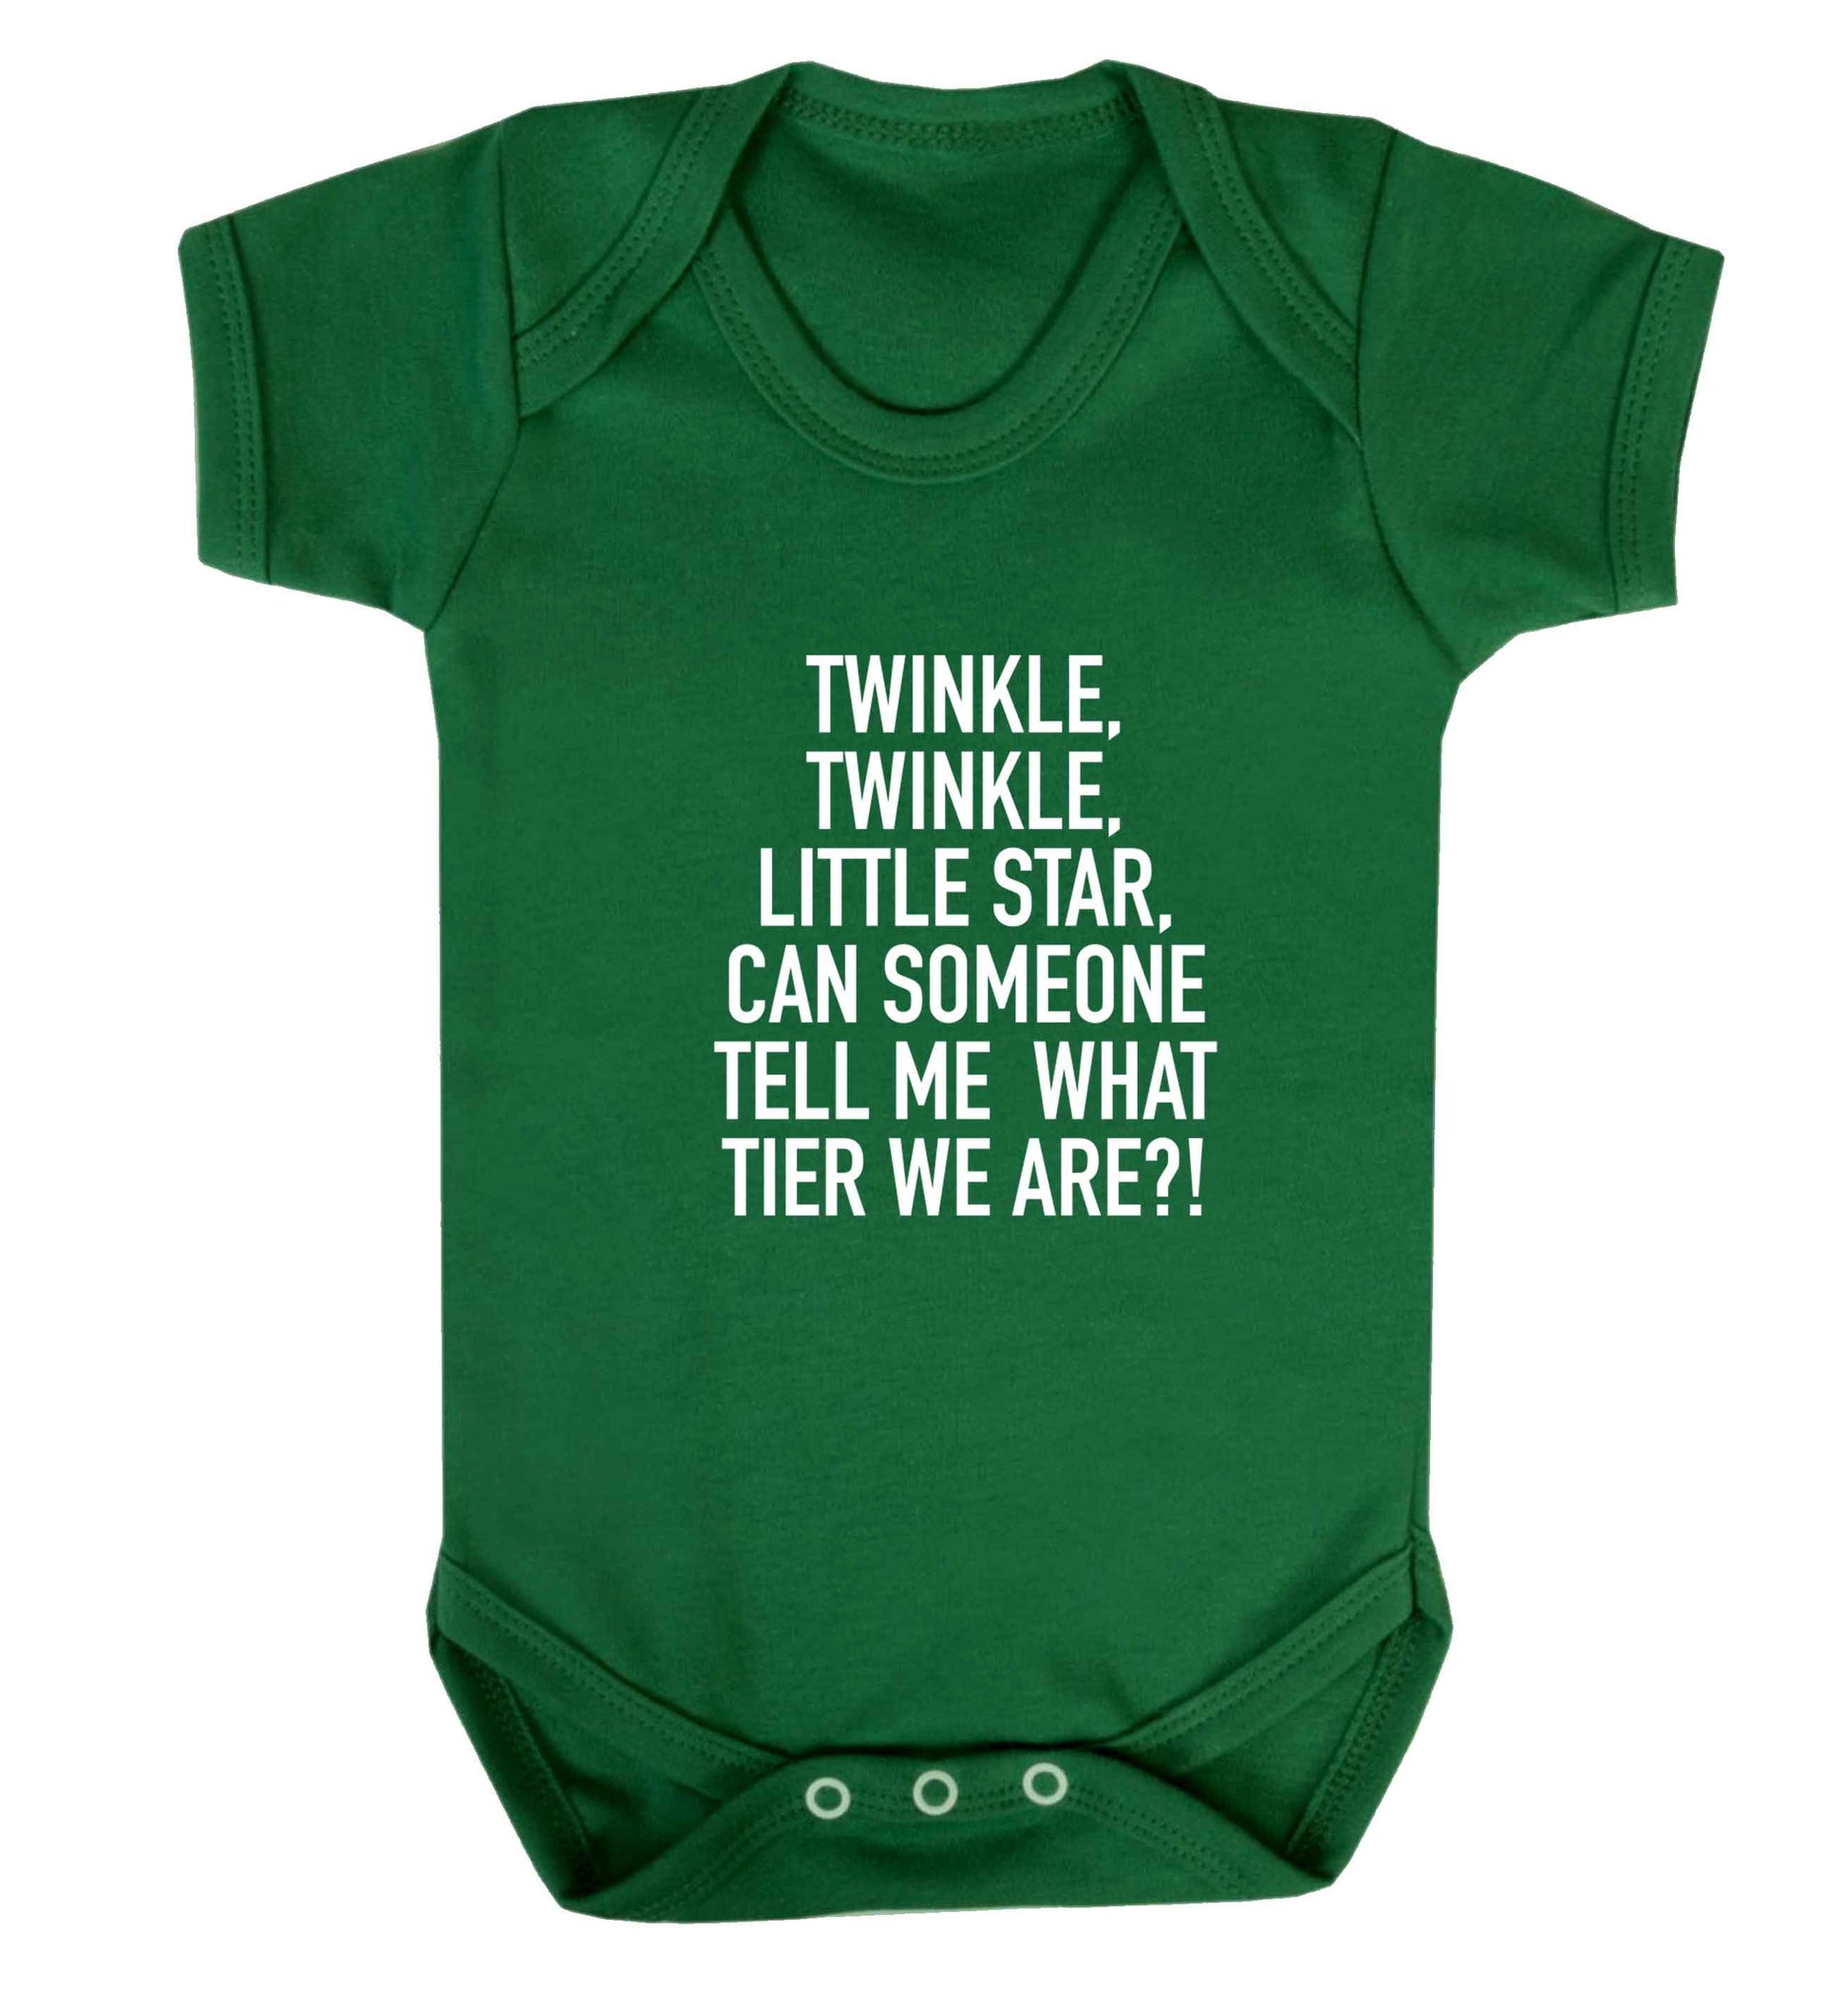 Twinkle twinkle, little star does anyone know what tier we are? baby vest green 18-24 months